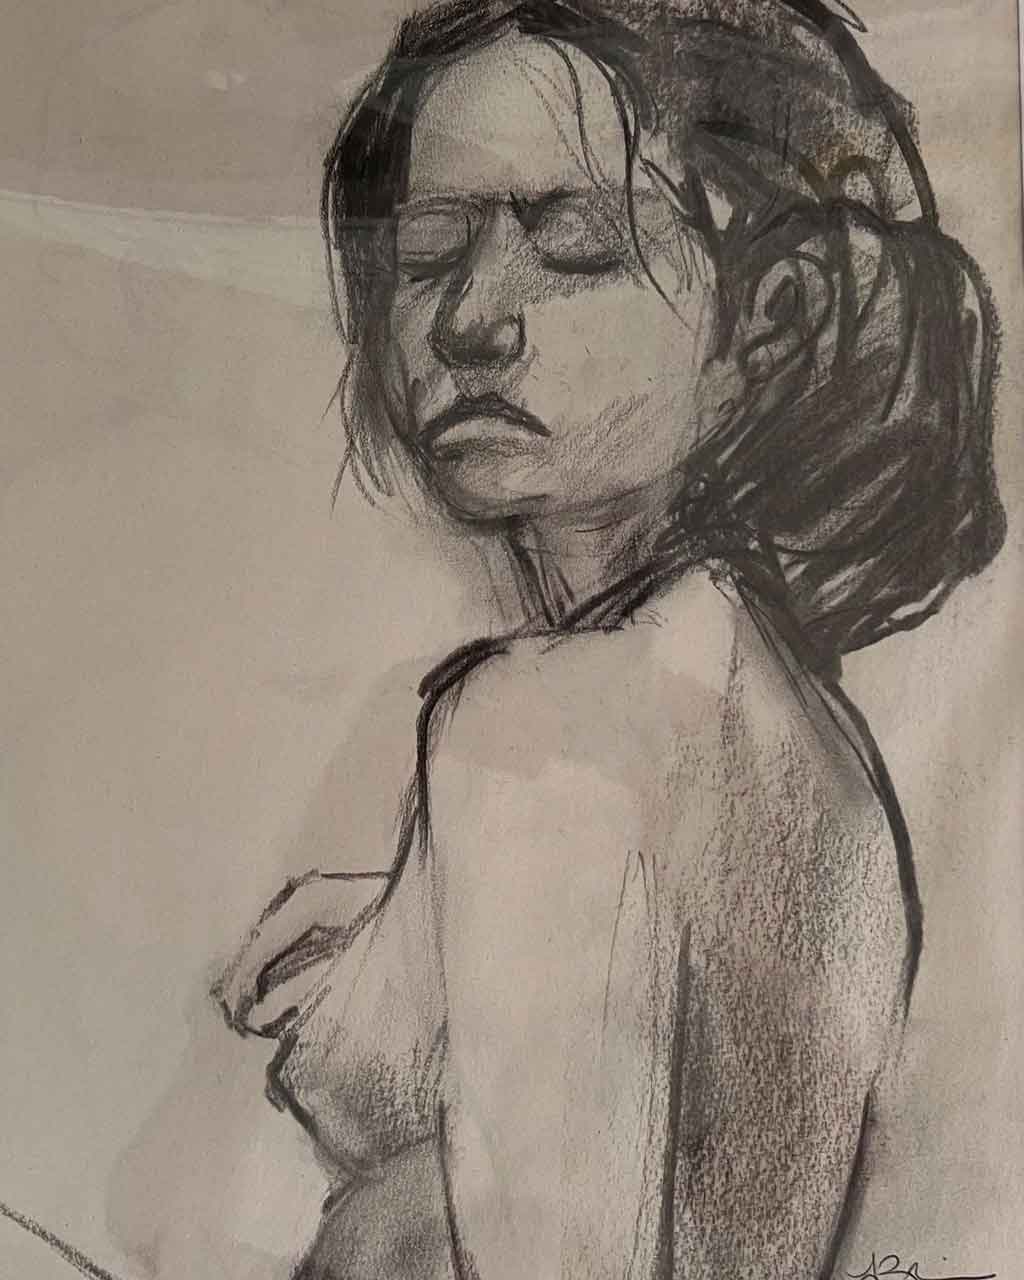 Faces, Lisa Bliss, "Glancing Figure", charcoal, $400, Portsmouth Arts Guild